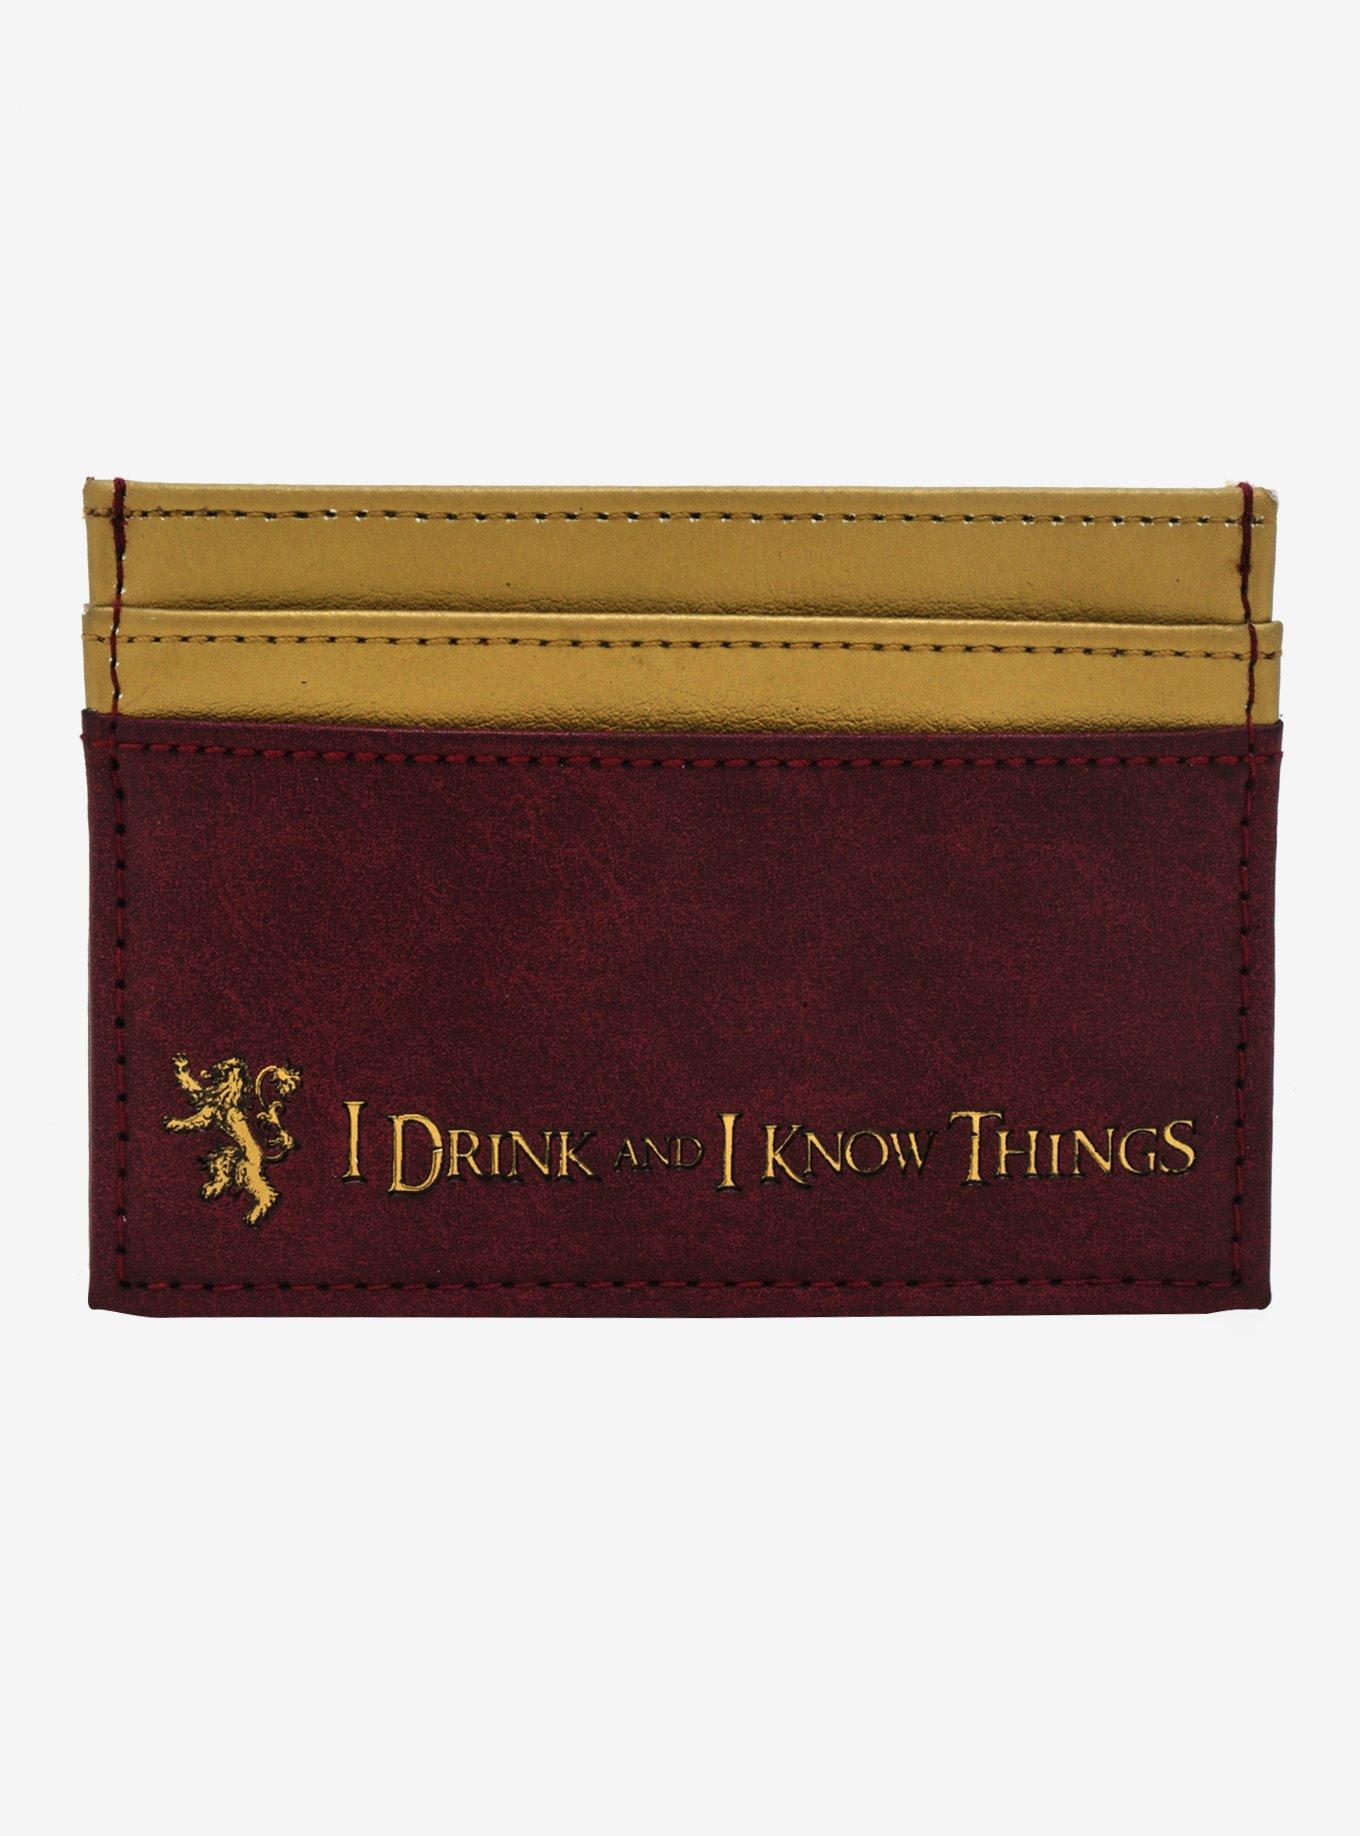 Game Of Thrones Tyrion Lannister Cardholder - BoxLunch Exclusive, , hi-res